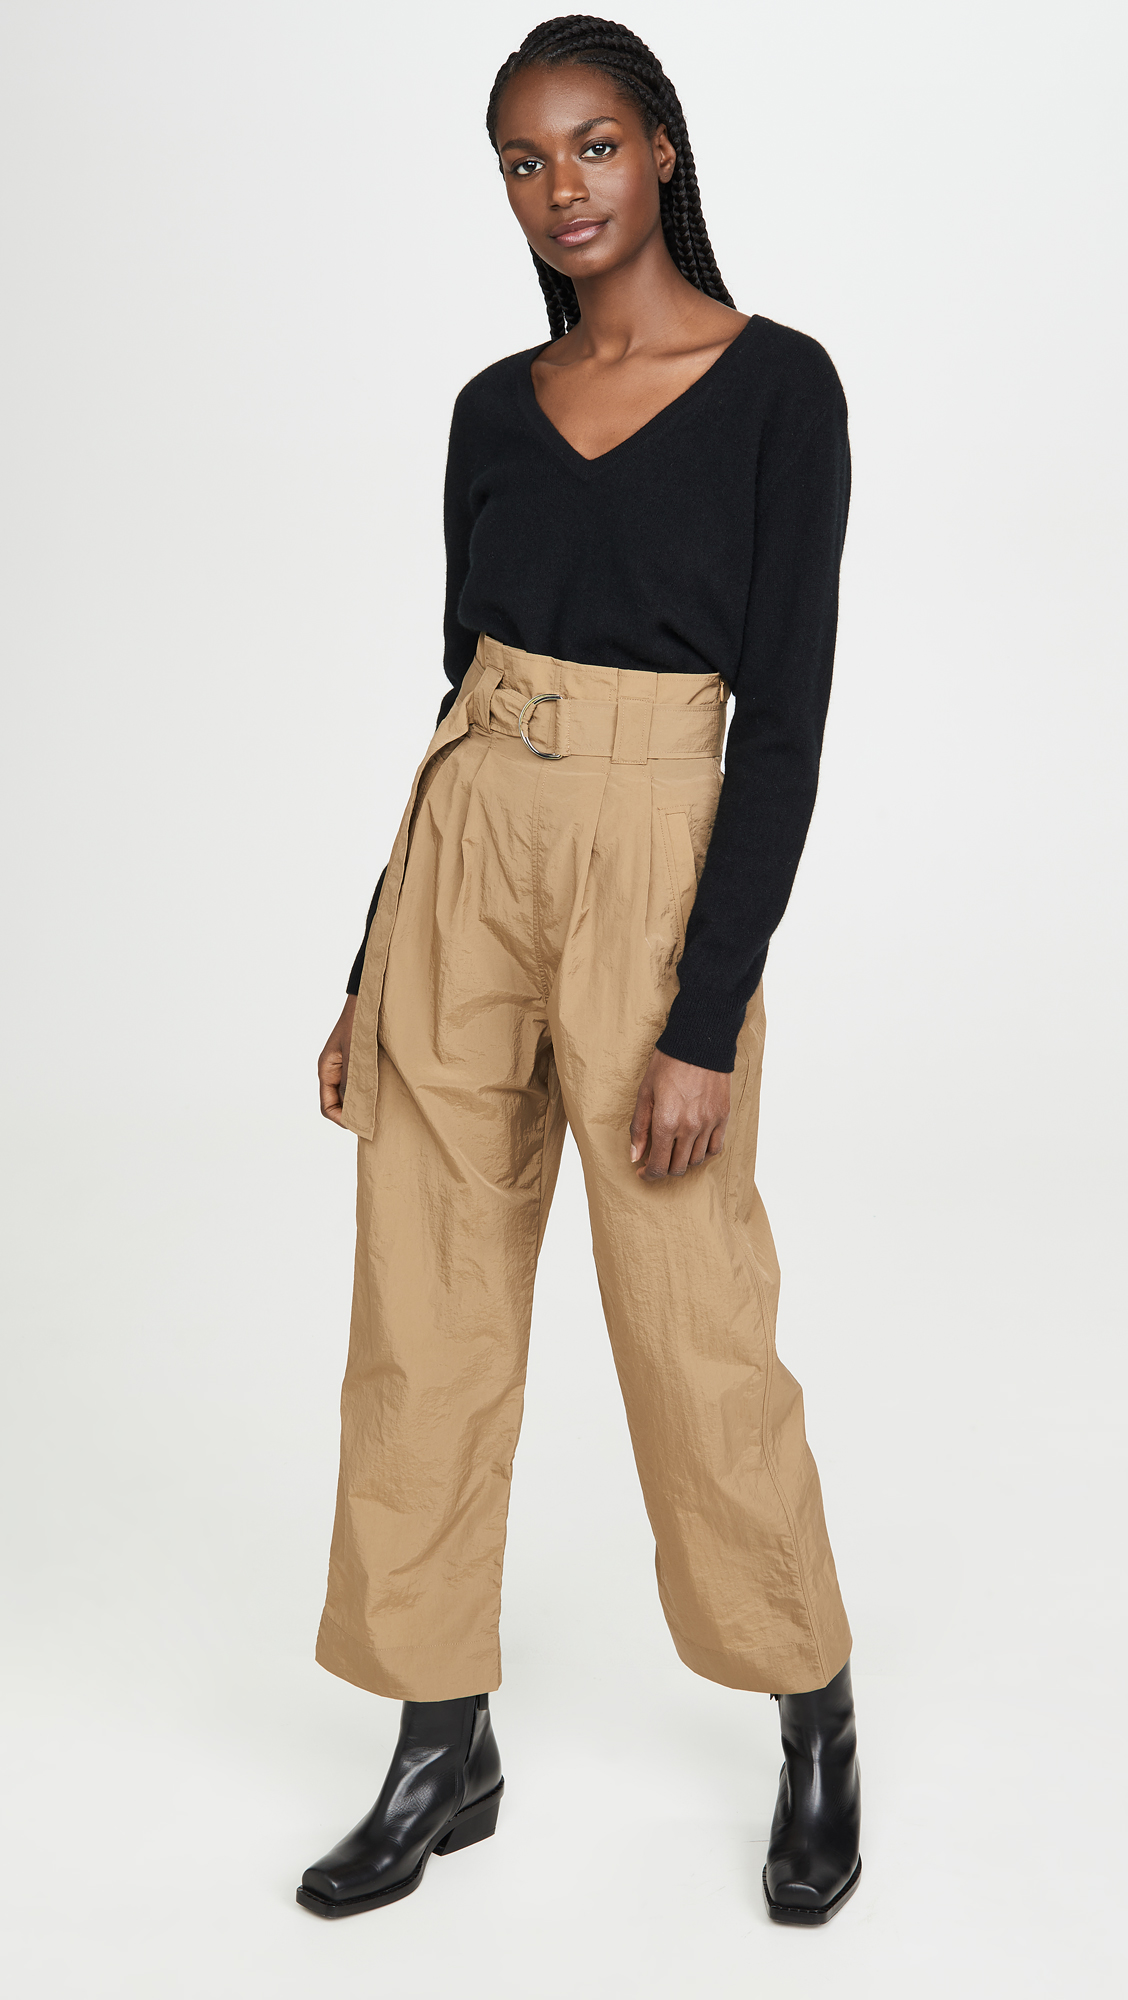 13 Khaki-Pant Outfits for Women That ...